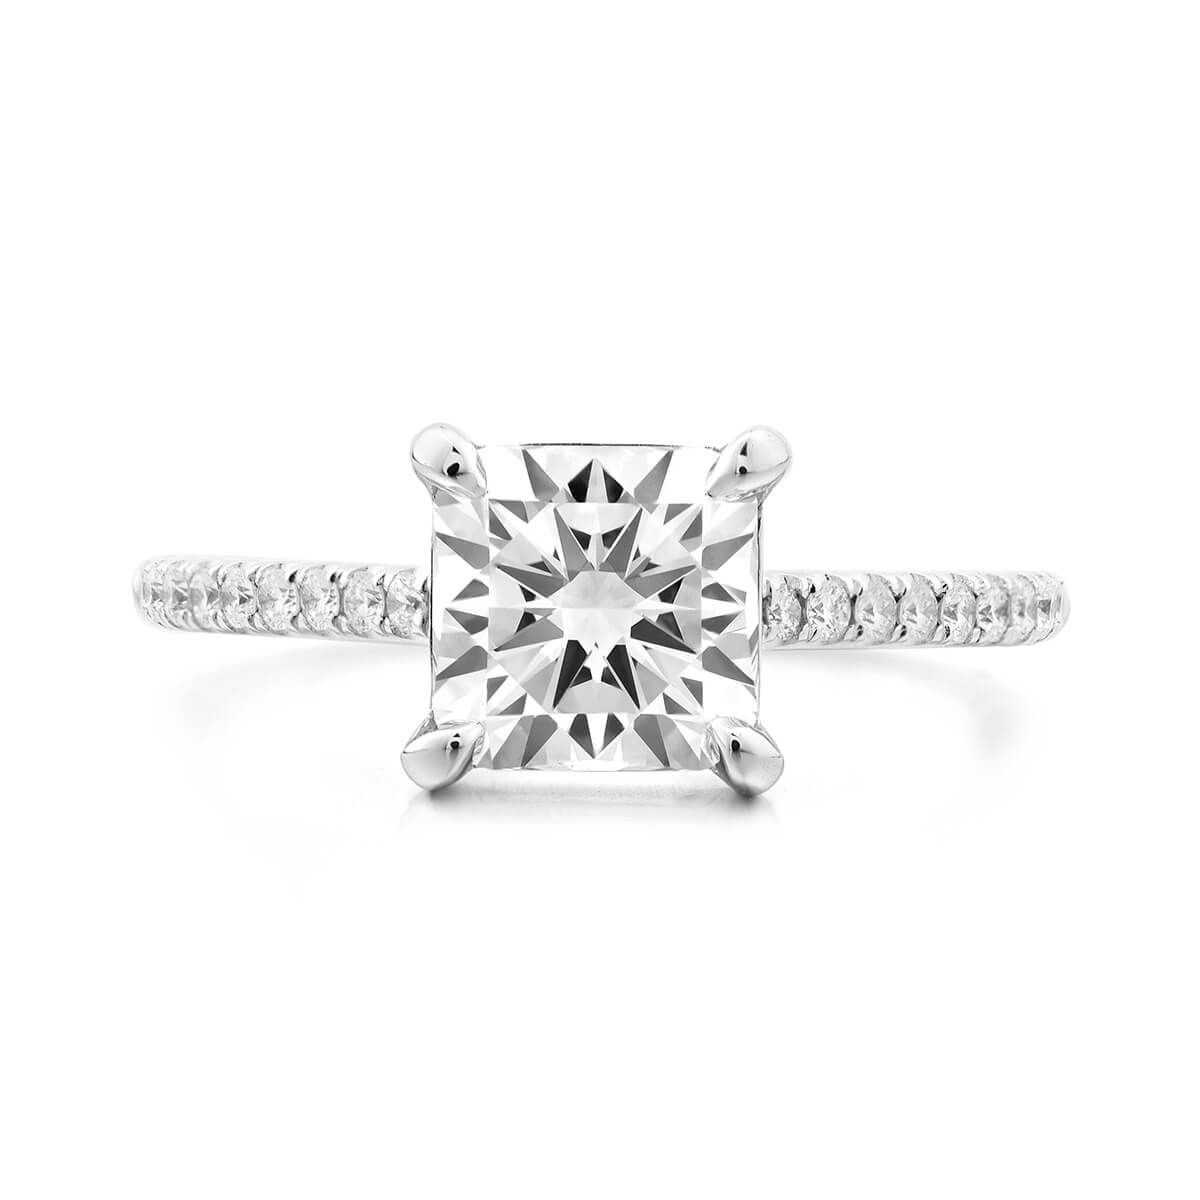  White Diamond Ring, 2.01 Ct. (2.18 Ct. TW), Cushion shape, HRD Certified, 180000073571